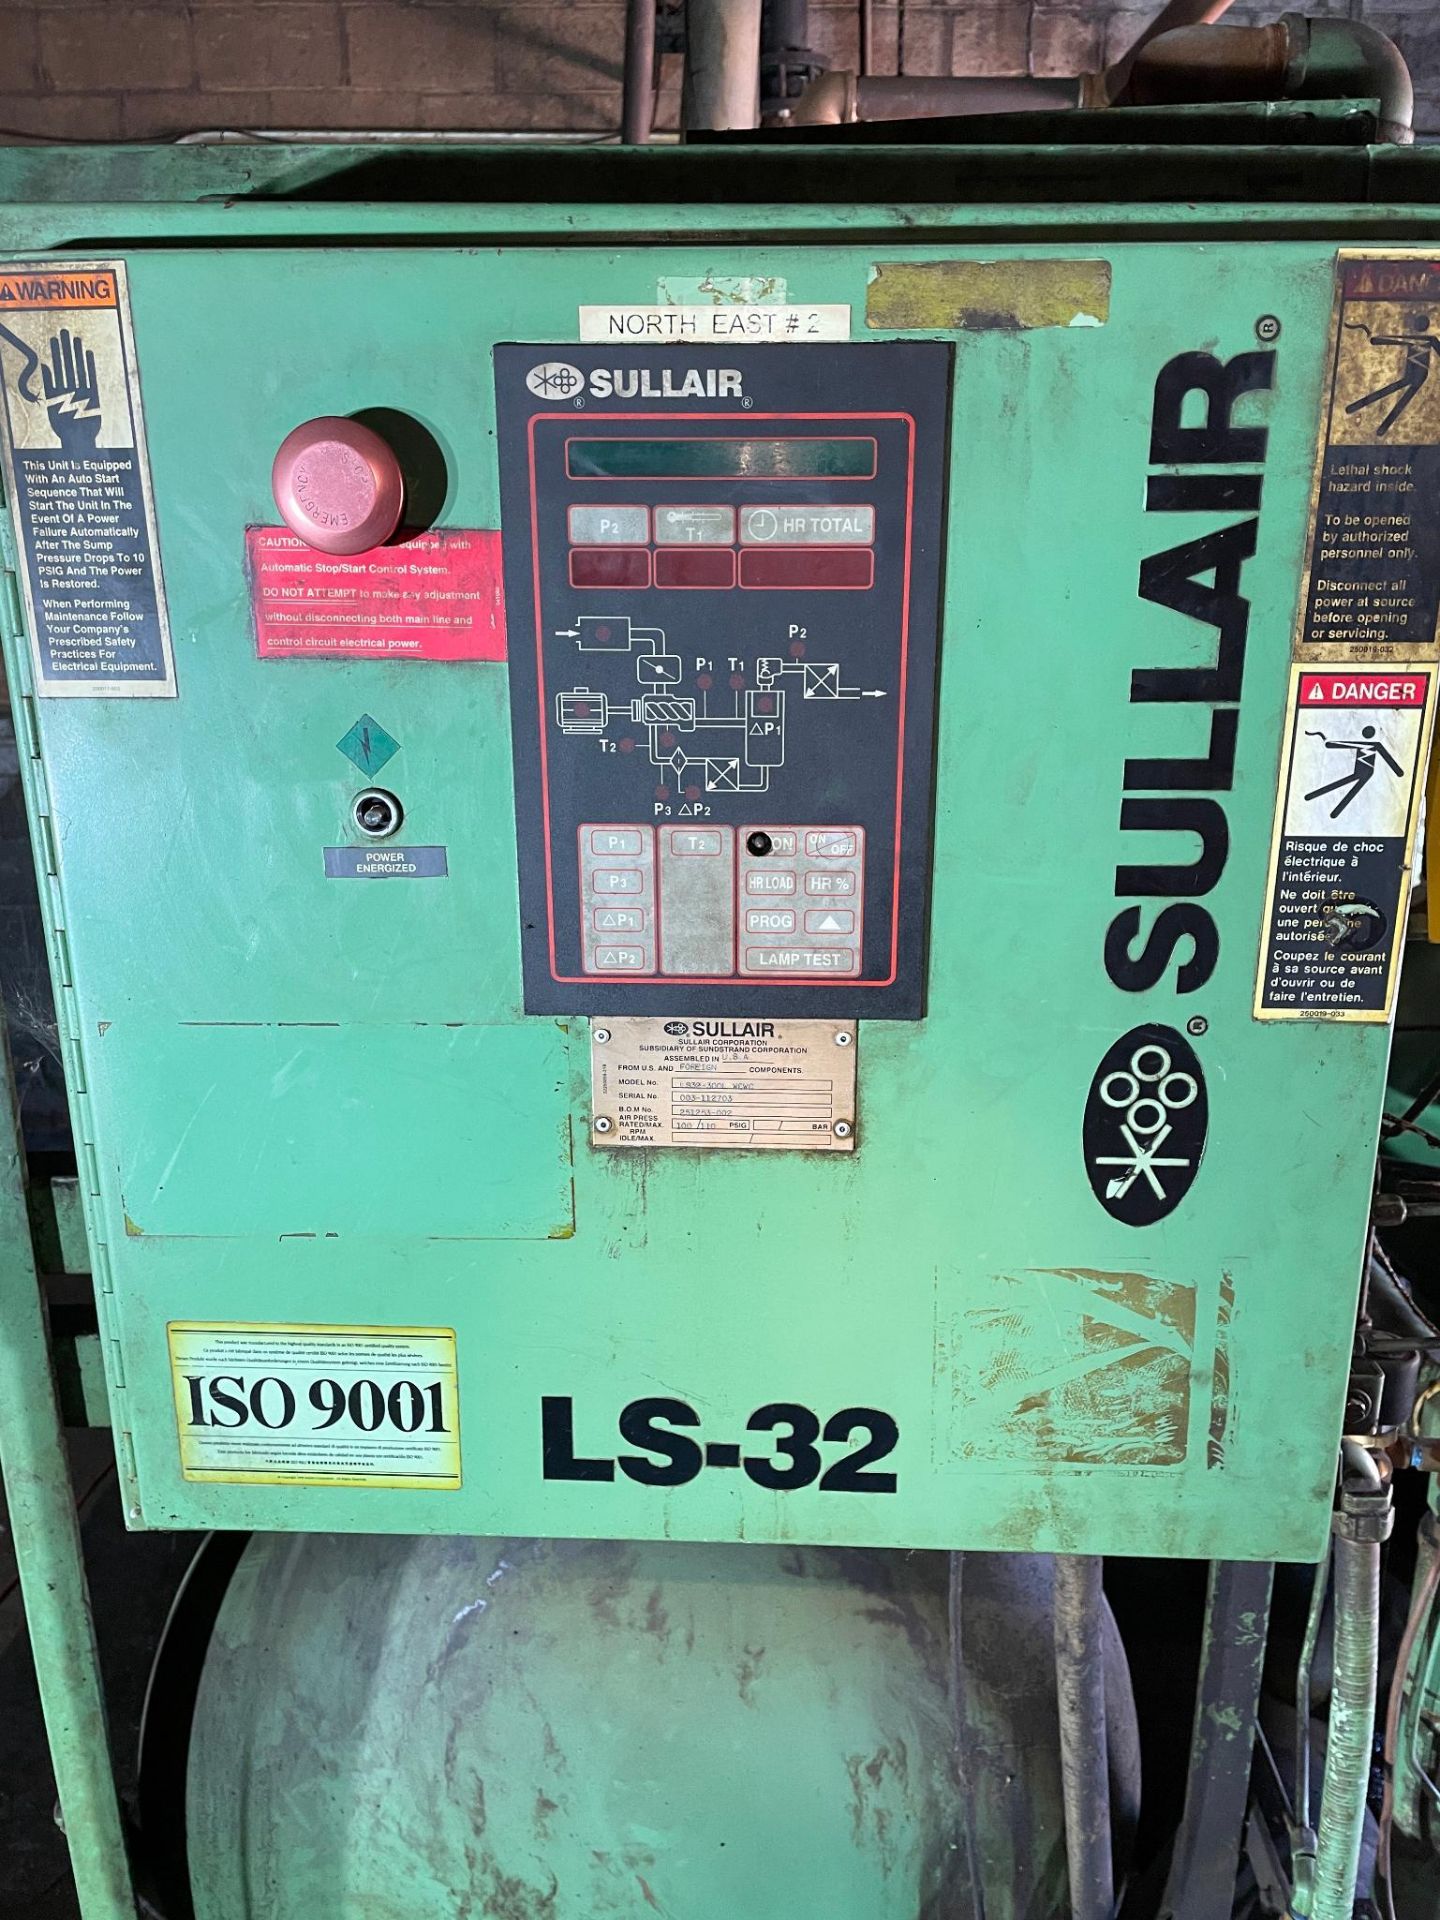 WATER COOLED ROTARY SCREW AIR COMPRESSOR, SULLAIR MDL. LS32-3001 WCWC, approx. 300 HP, S/N 003- - Image 3 of 4